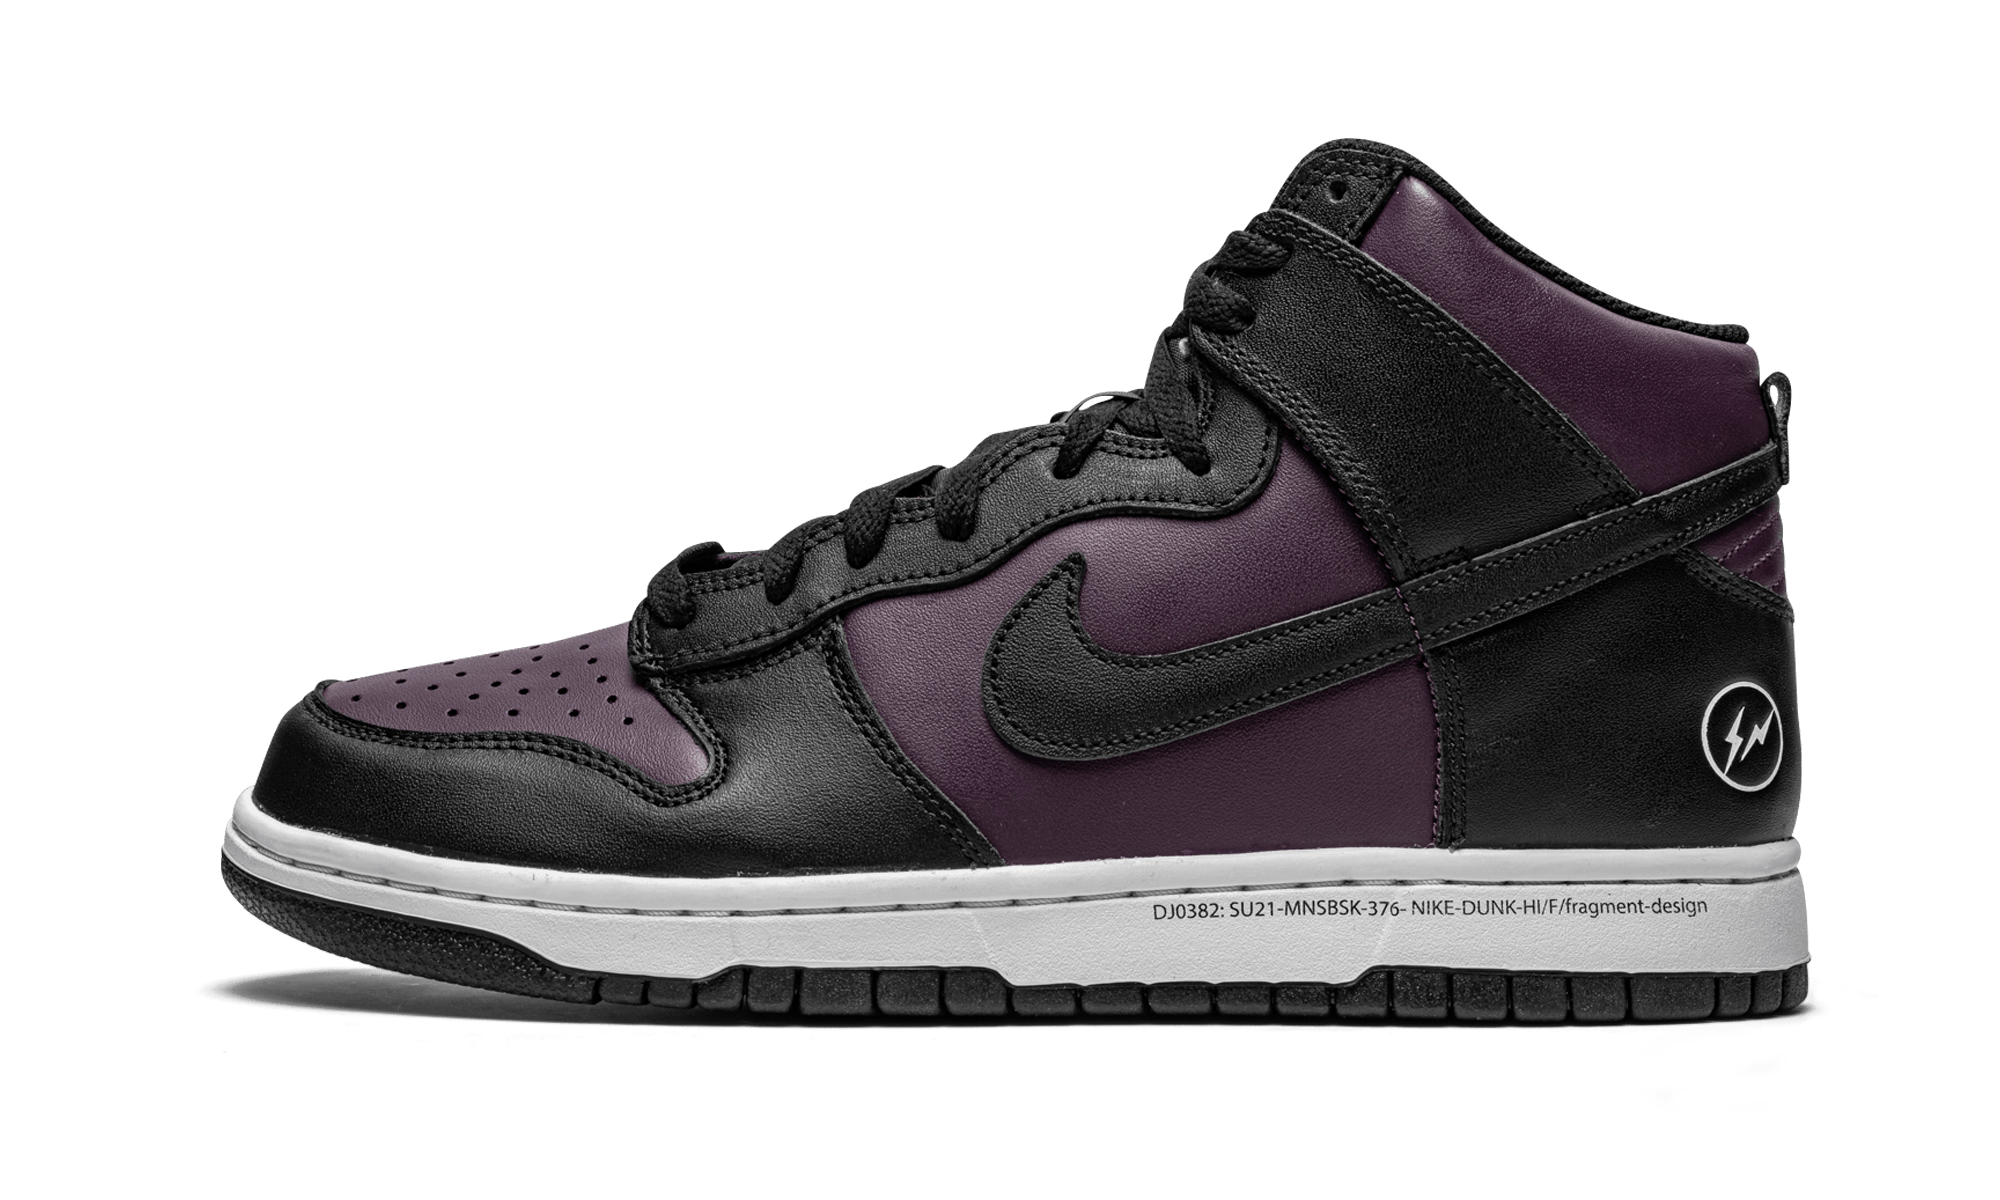 Best Look Yet at the Fragment x Nike Dunk Highs - The Elite